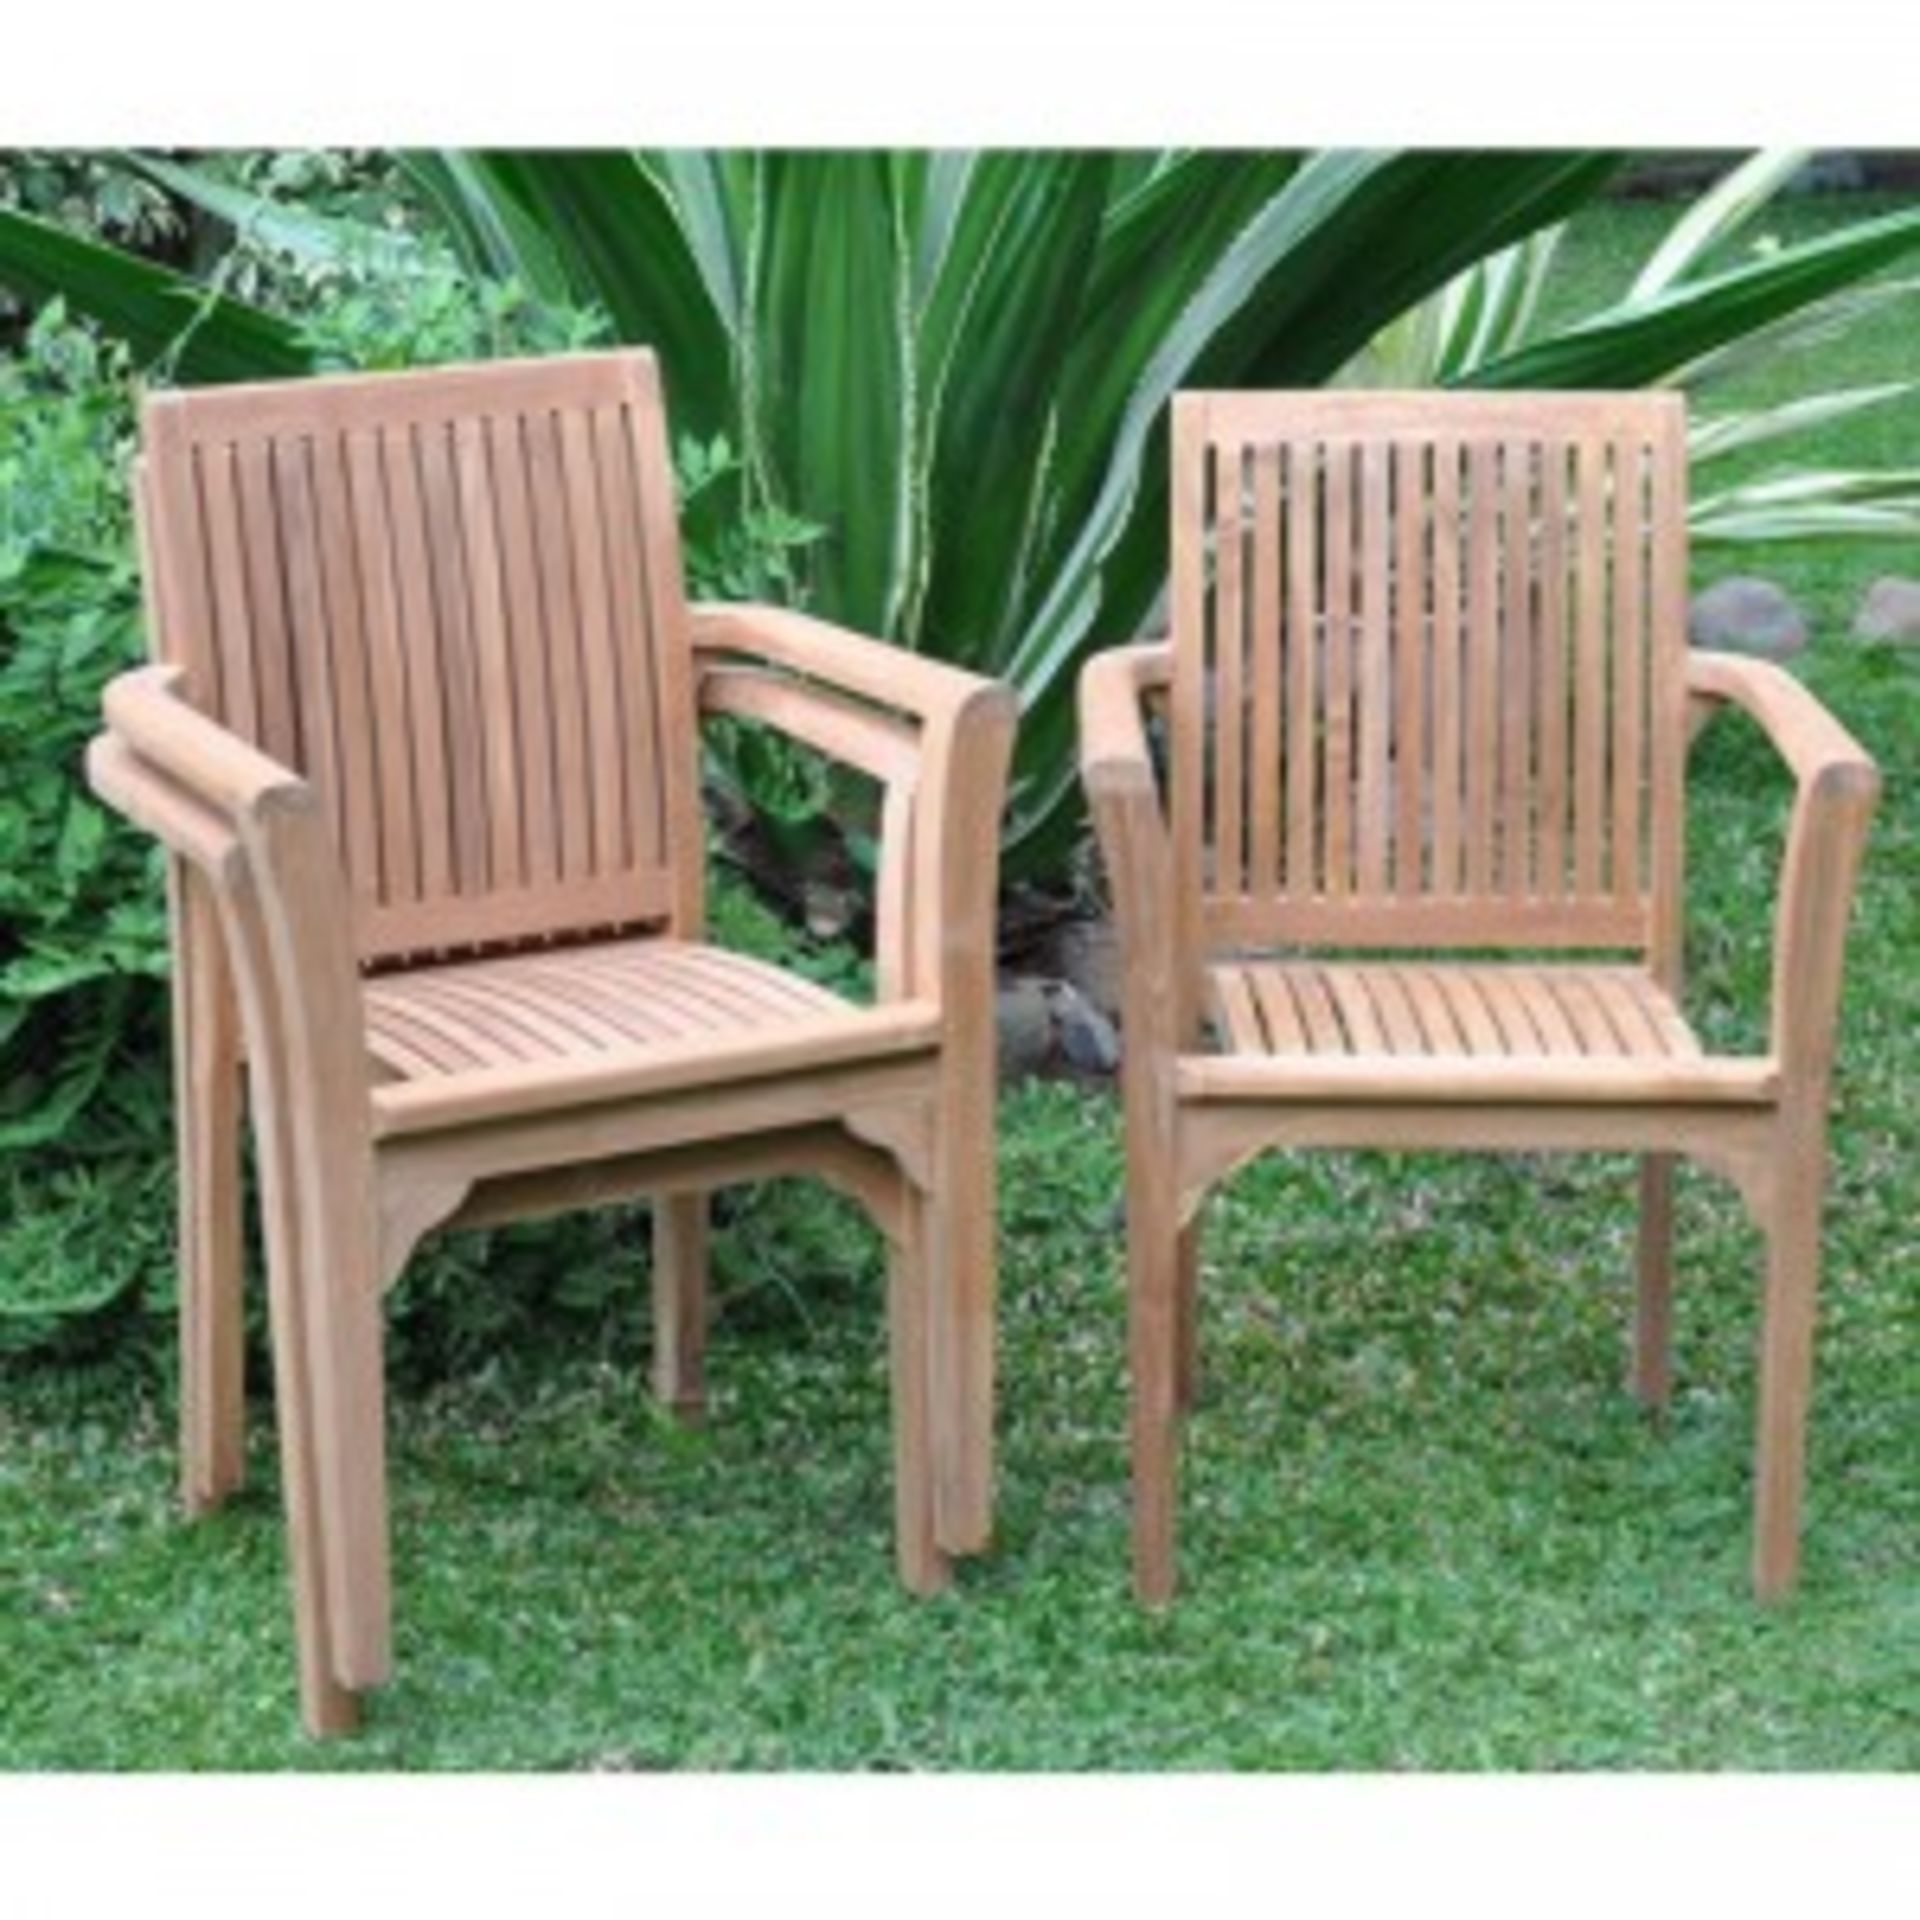 V Brand New One Teak Stacking Chair - Made From Grade A Plantation Teak RRP £199 NOTE: Item Is